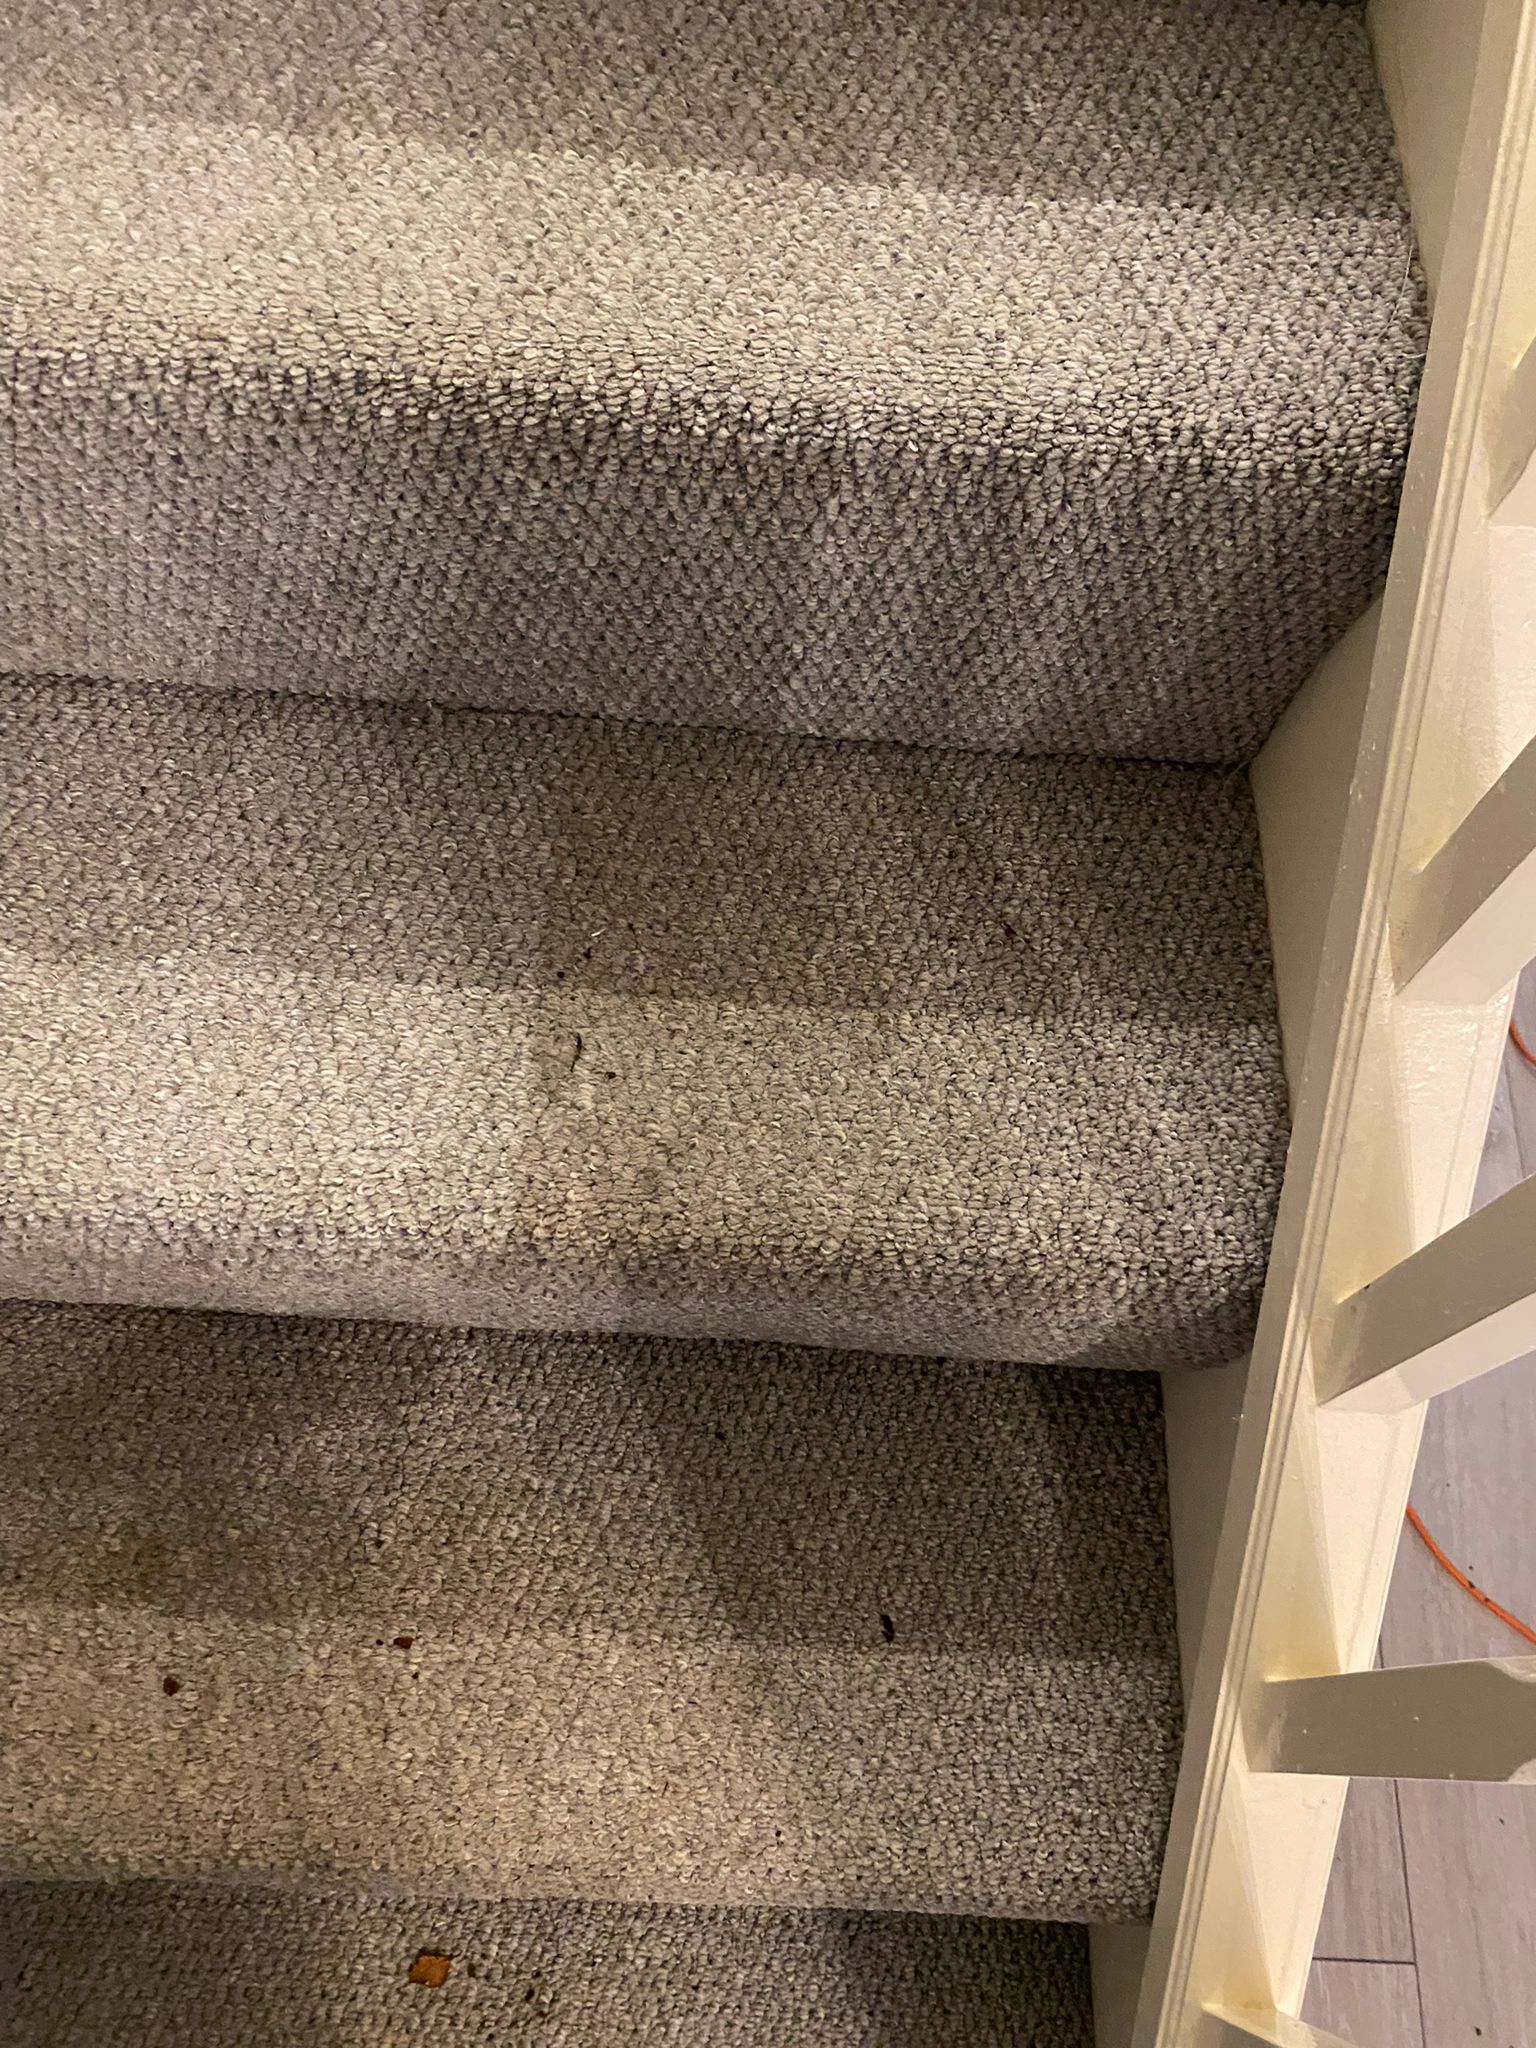 Dirt and dust build up on stairs